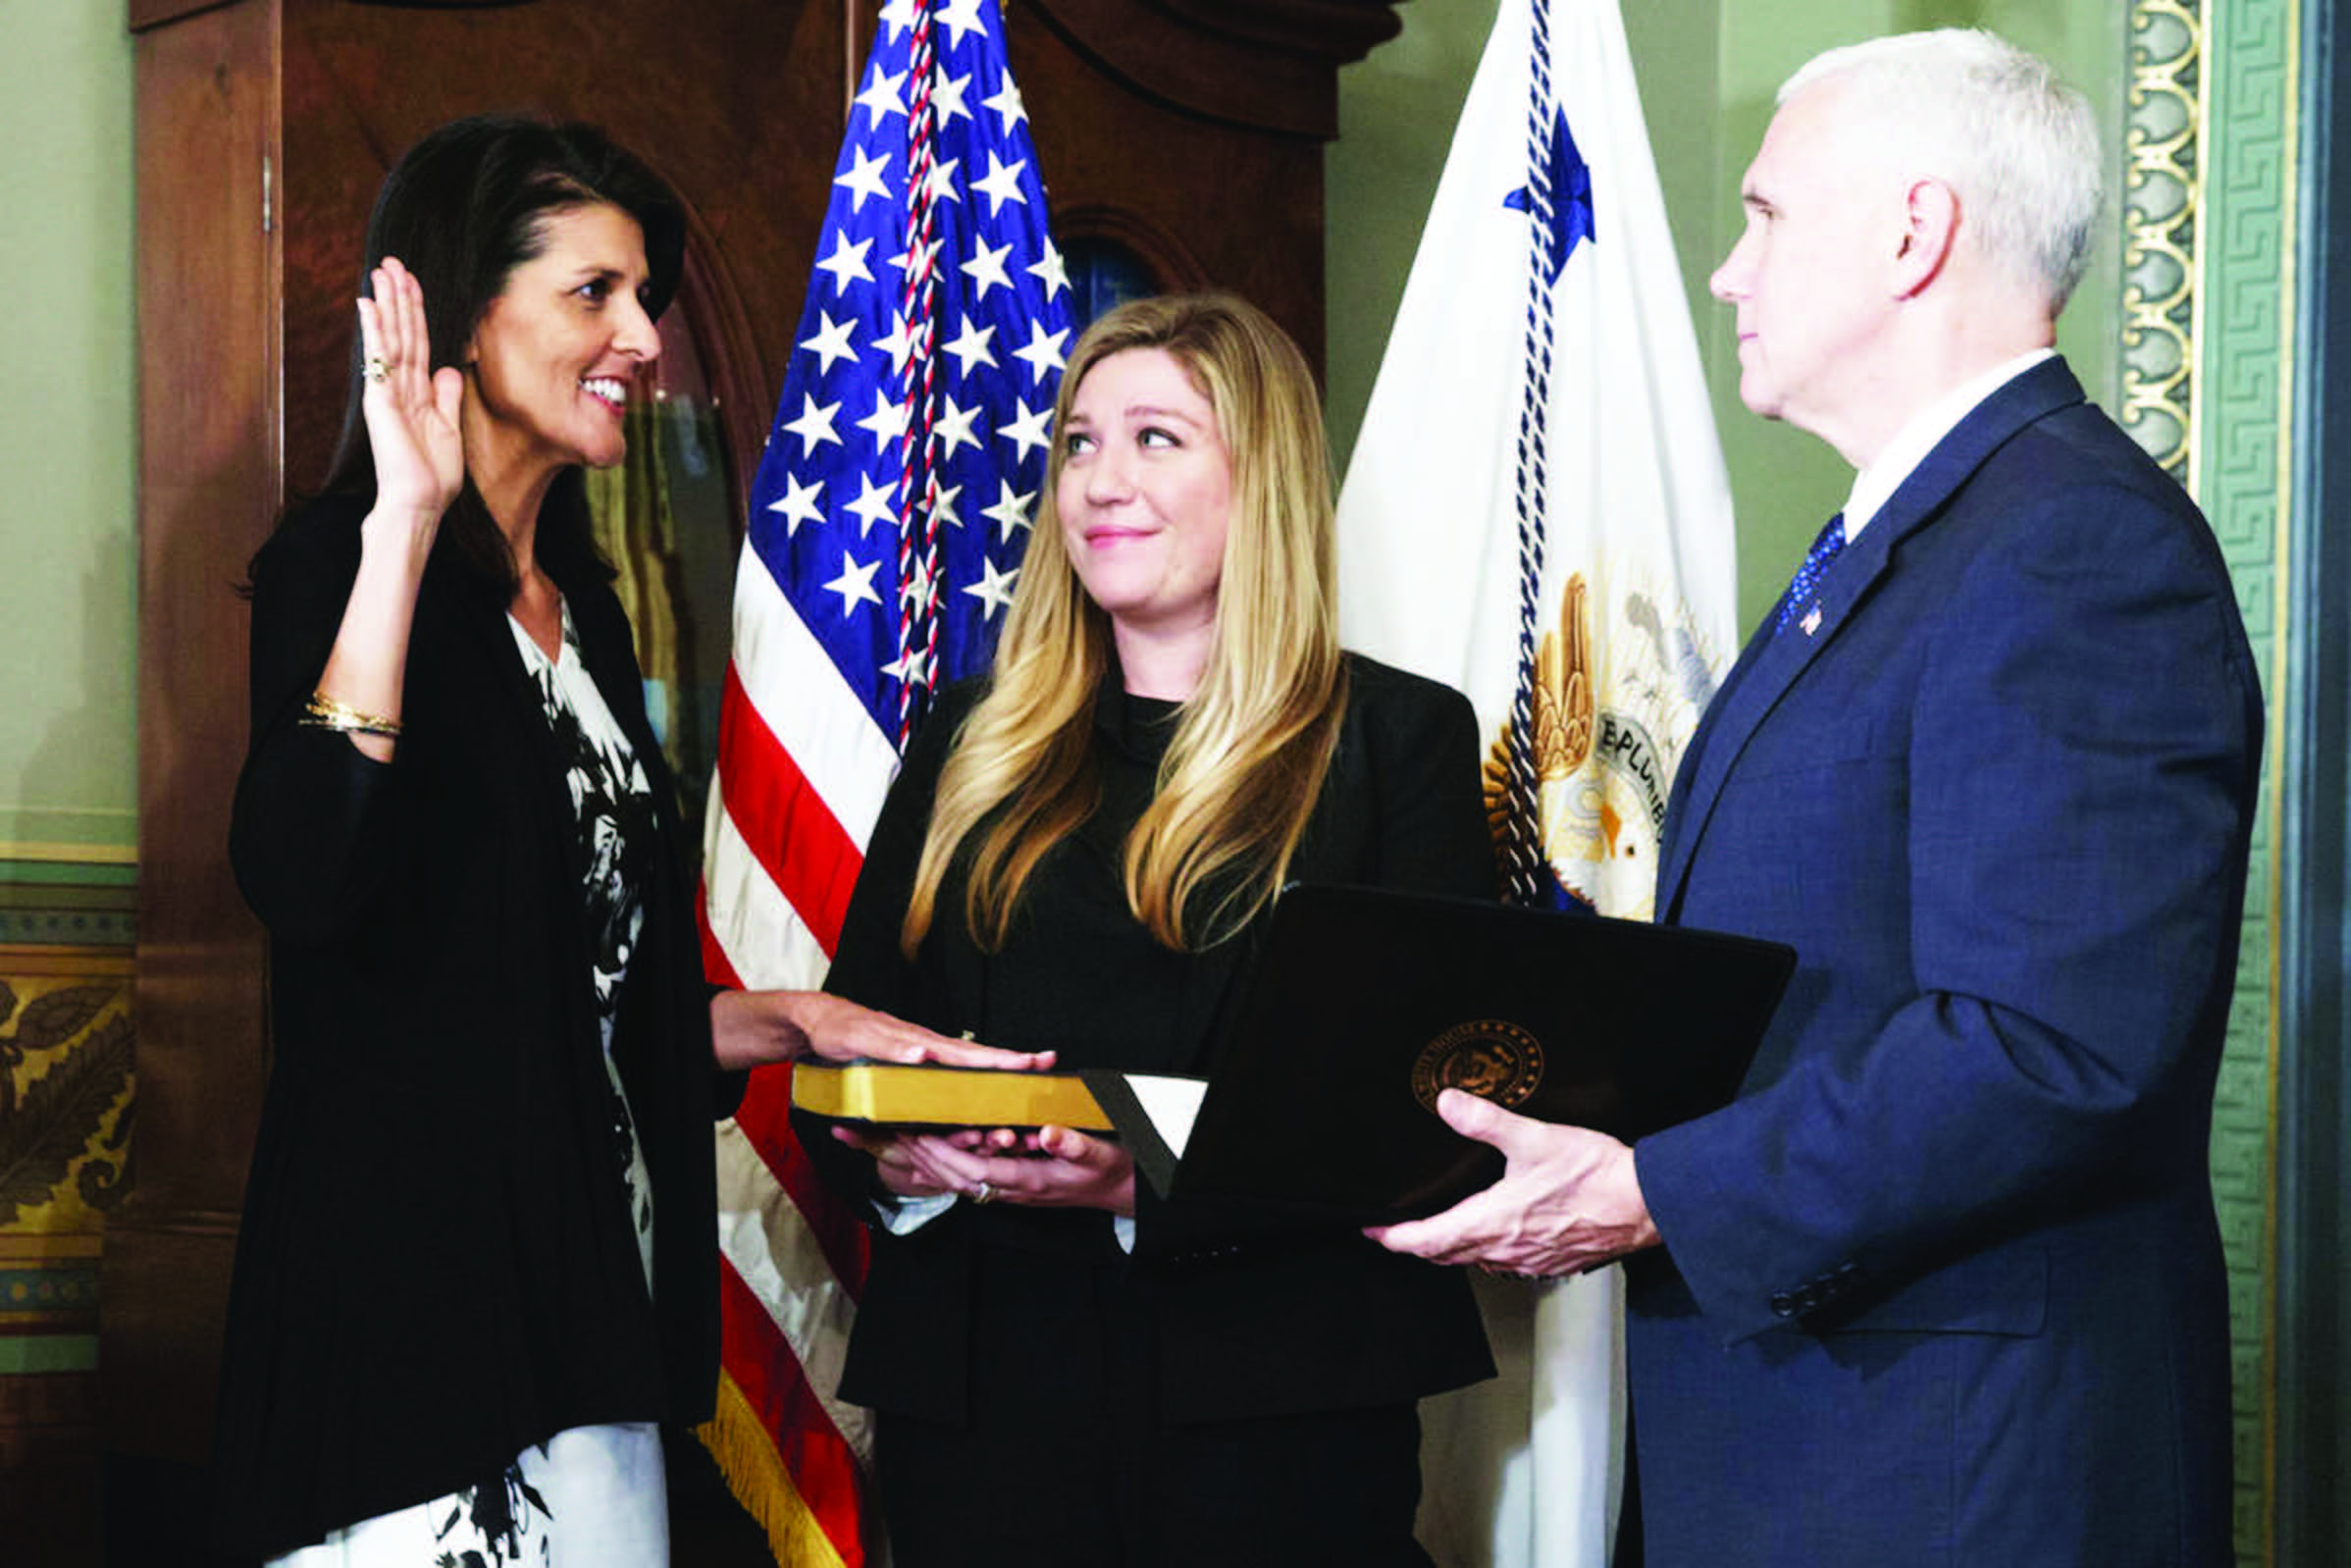 Former South Carolina Gov. Nikki Haley is being sworn in as the US ambassador to the United Nations by US Vice President Mike Pence, January 25, 2017